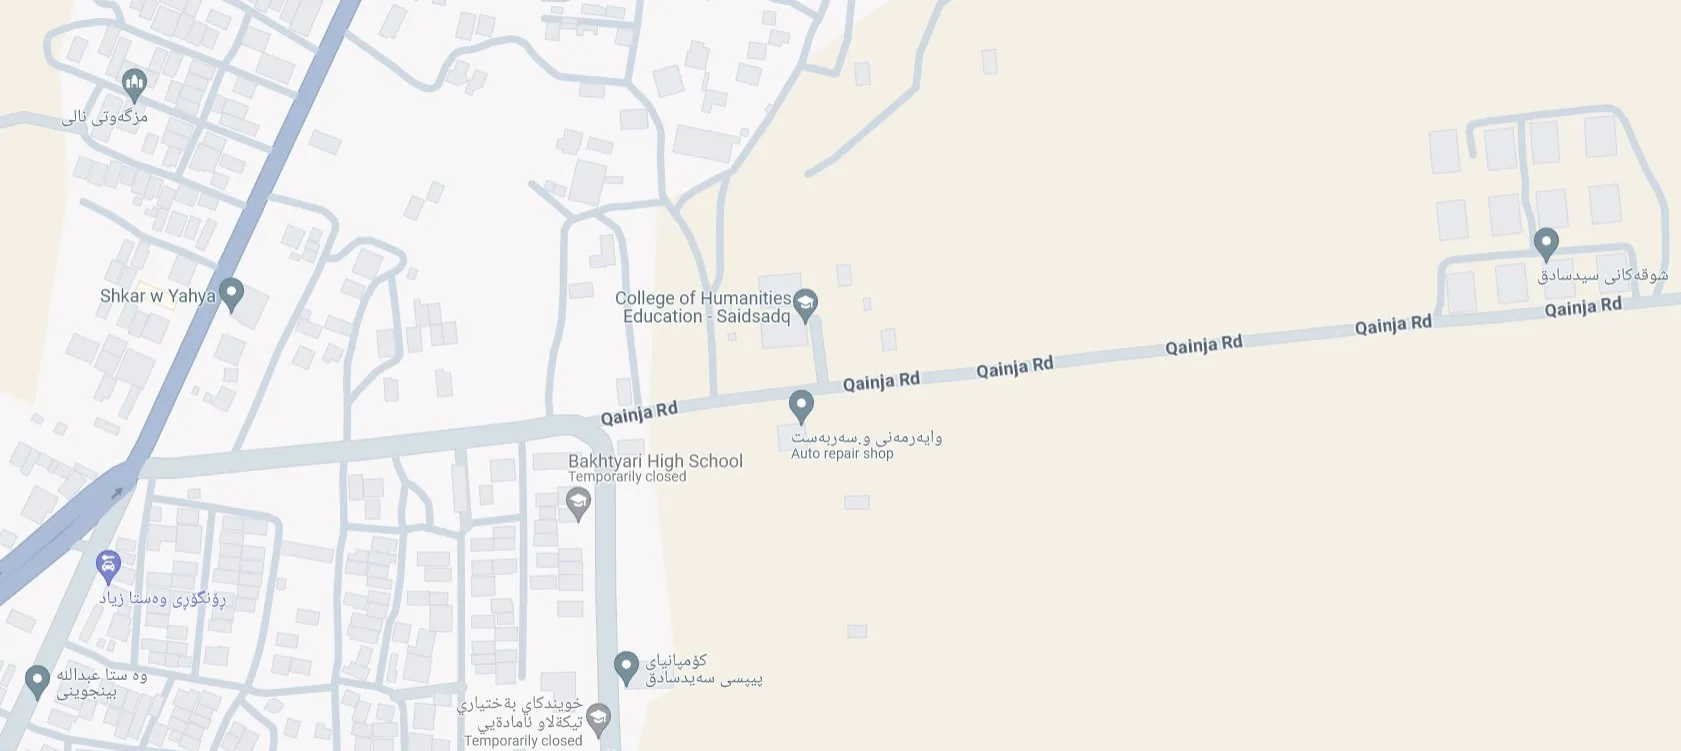 College Of Humanities Education On Google Maps